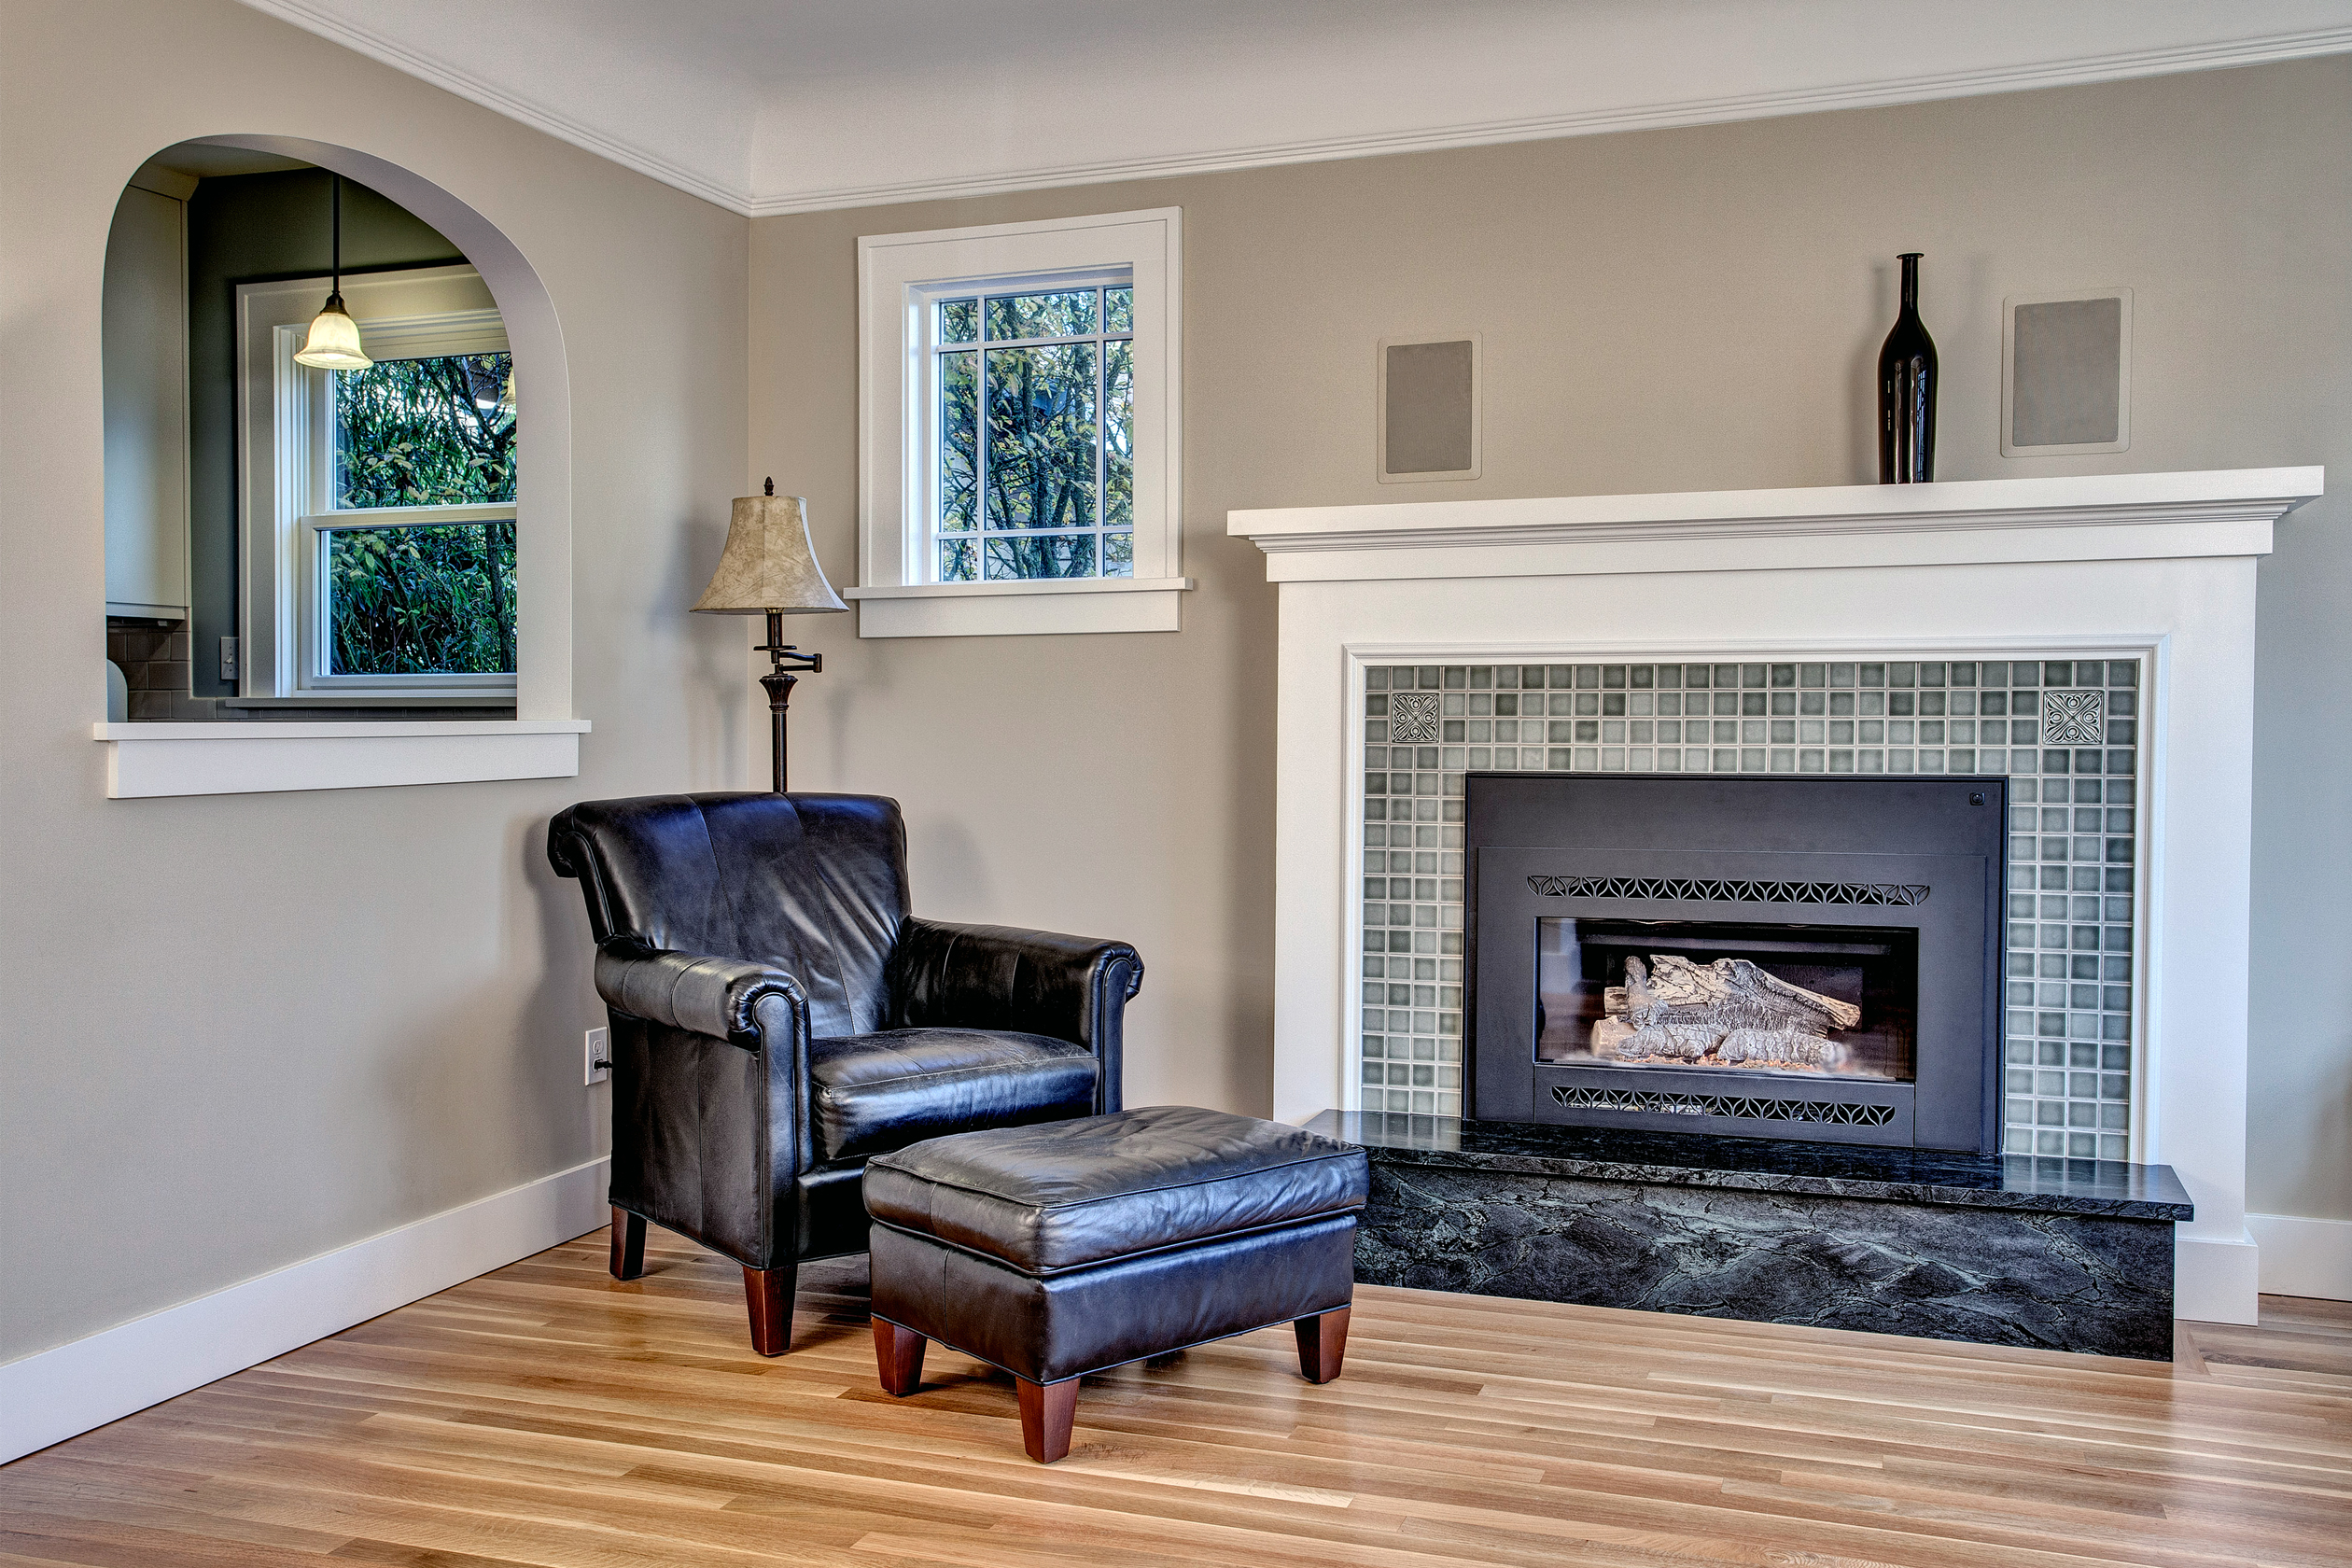 Bungalow West: Second-Floor Addition to a Bungalow – Living Room Hearth